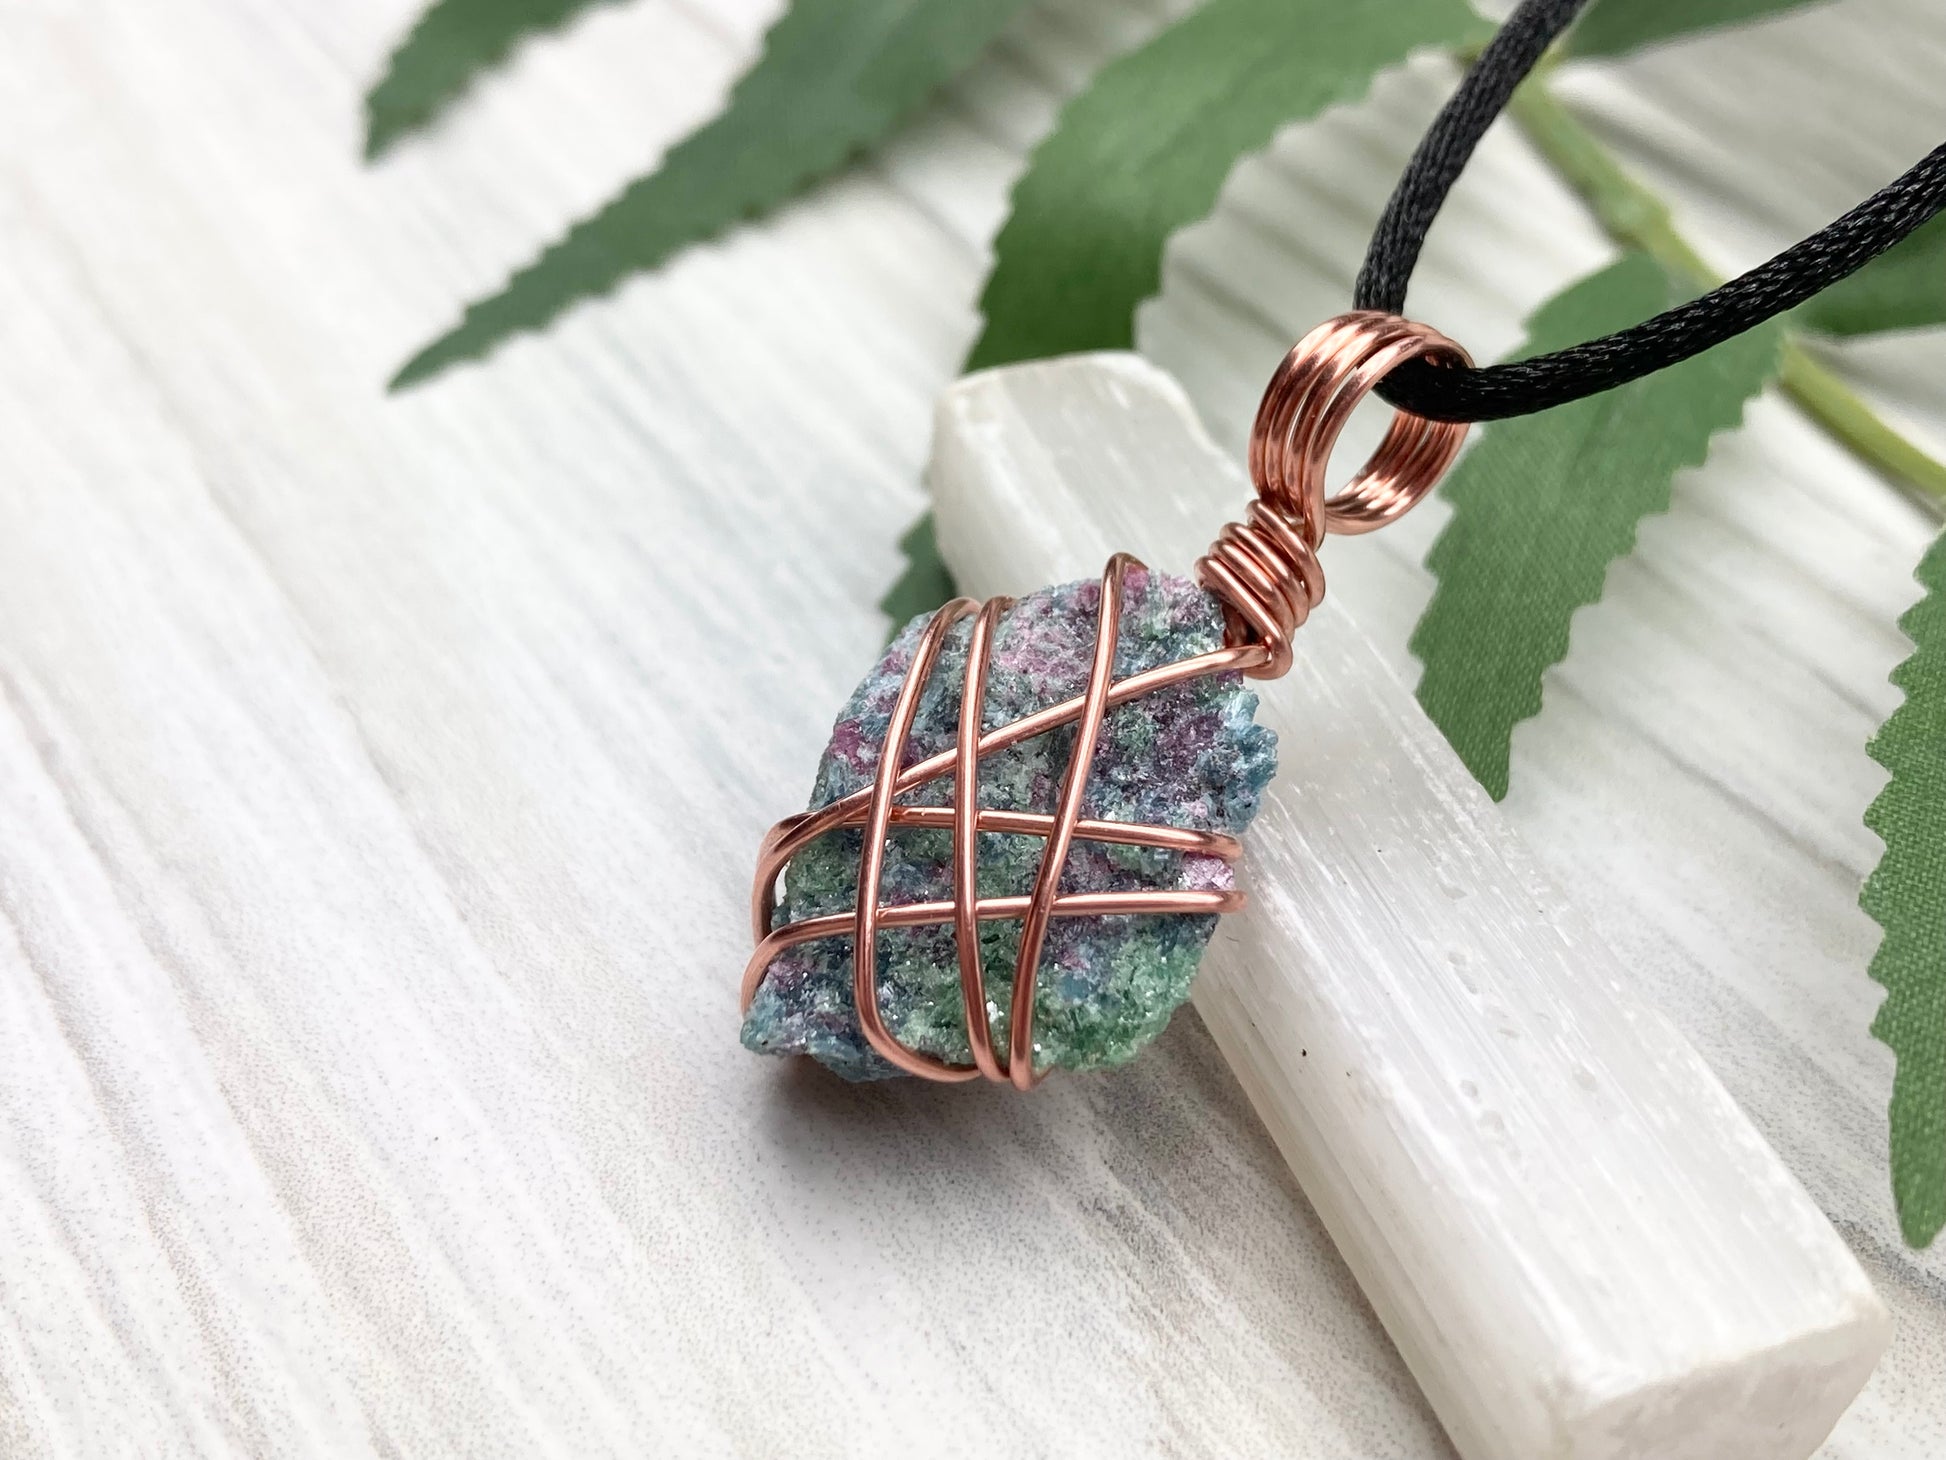 Raw Ruby Zoisite Necklace. This Ruby Zoisite Crystal Is Hand Wrapped With Pure Copper Wire For A Pendant. This Stone is Blue, Red And Green Colored. Comes On A Black Chain. Spiritual New Age Style Jewelry. Left Side View.